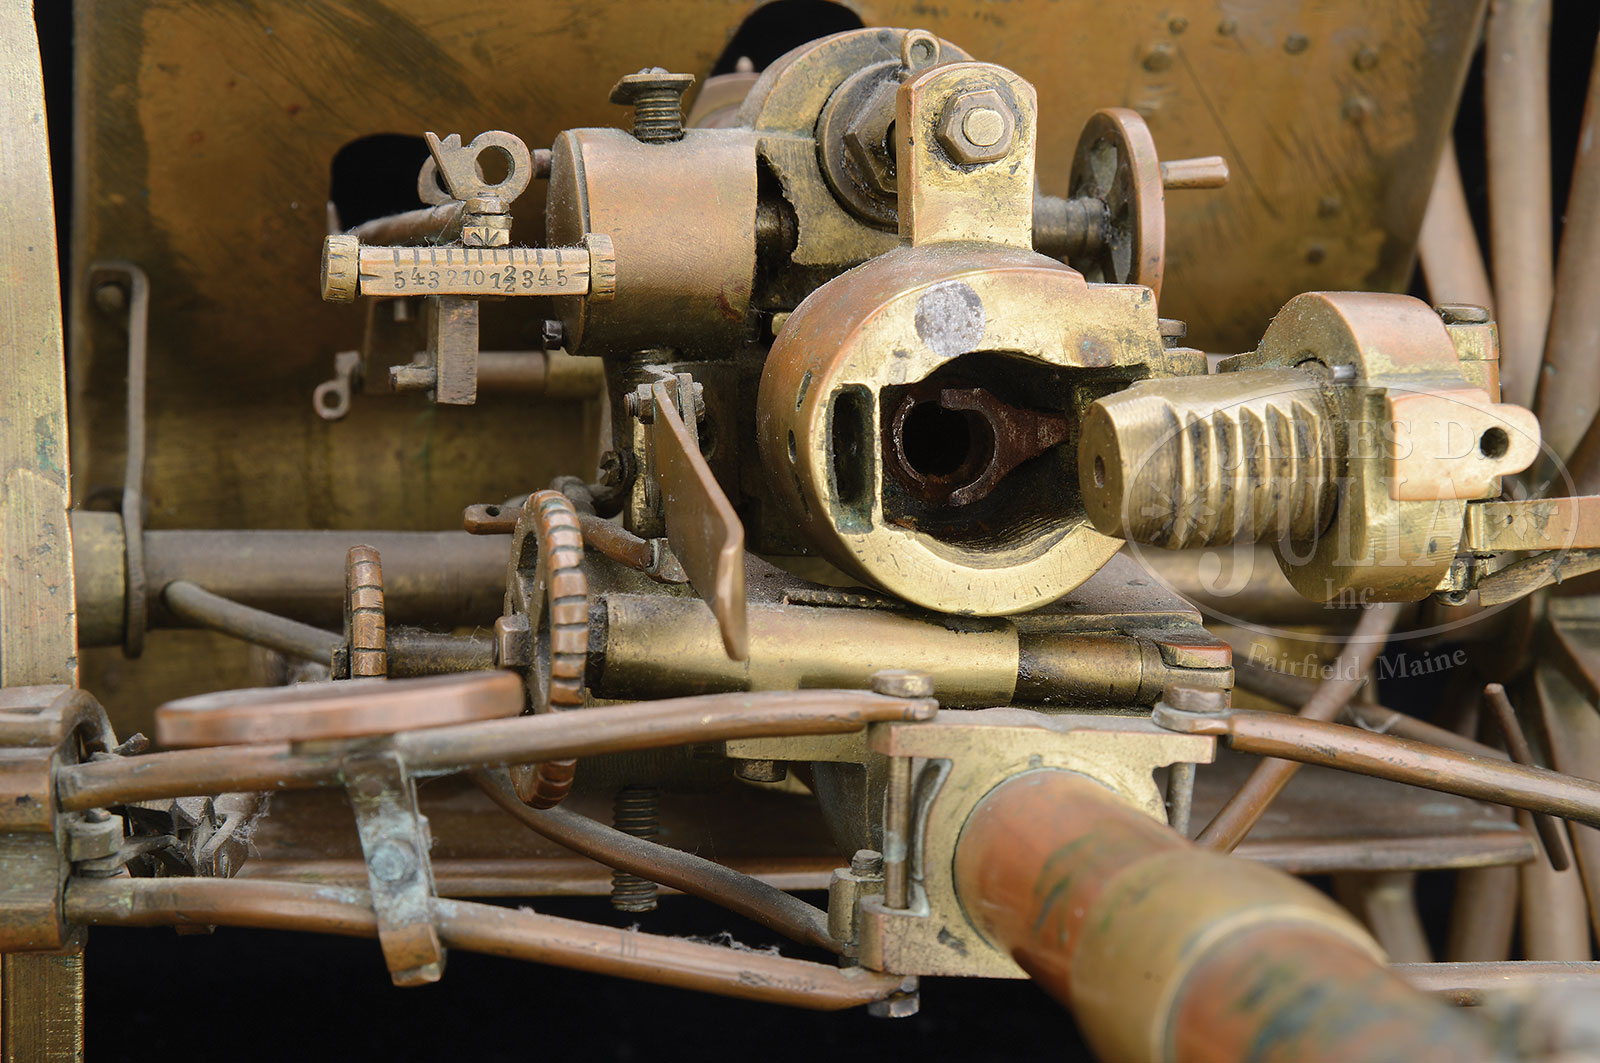 Ordnance Qf 18-Pounder Wallpapers